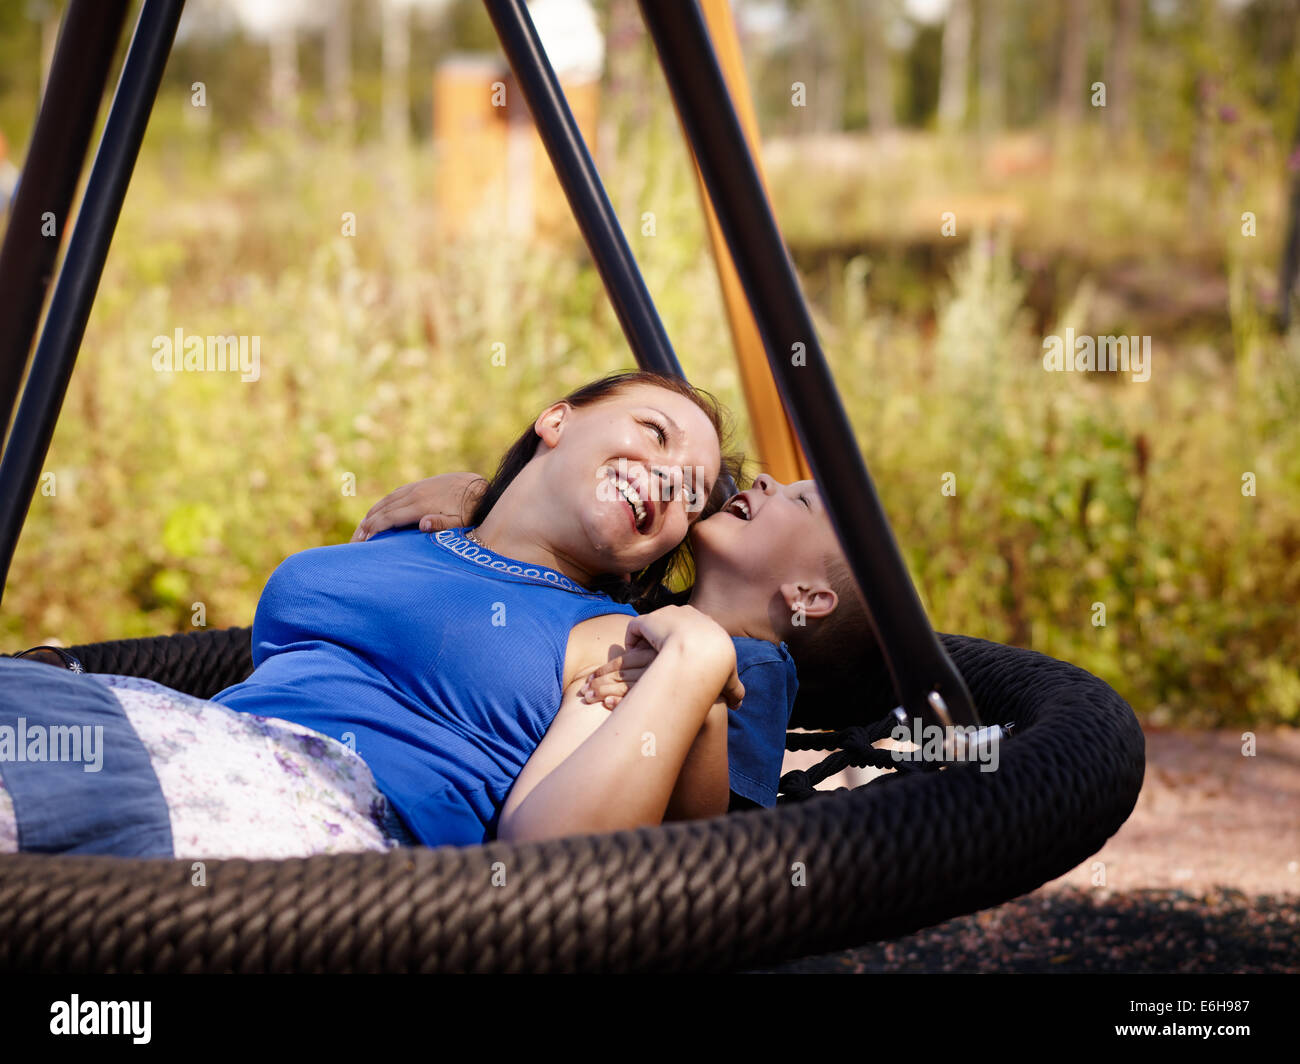 Mother and six year old boy child sitting together on the swing Stock Photo